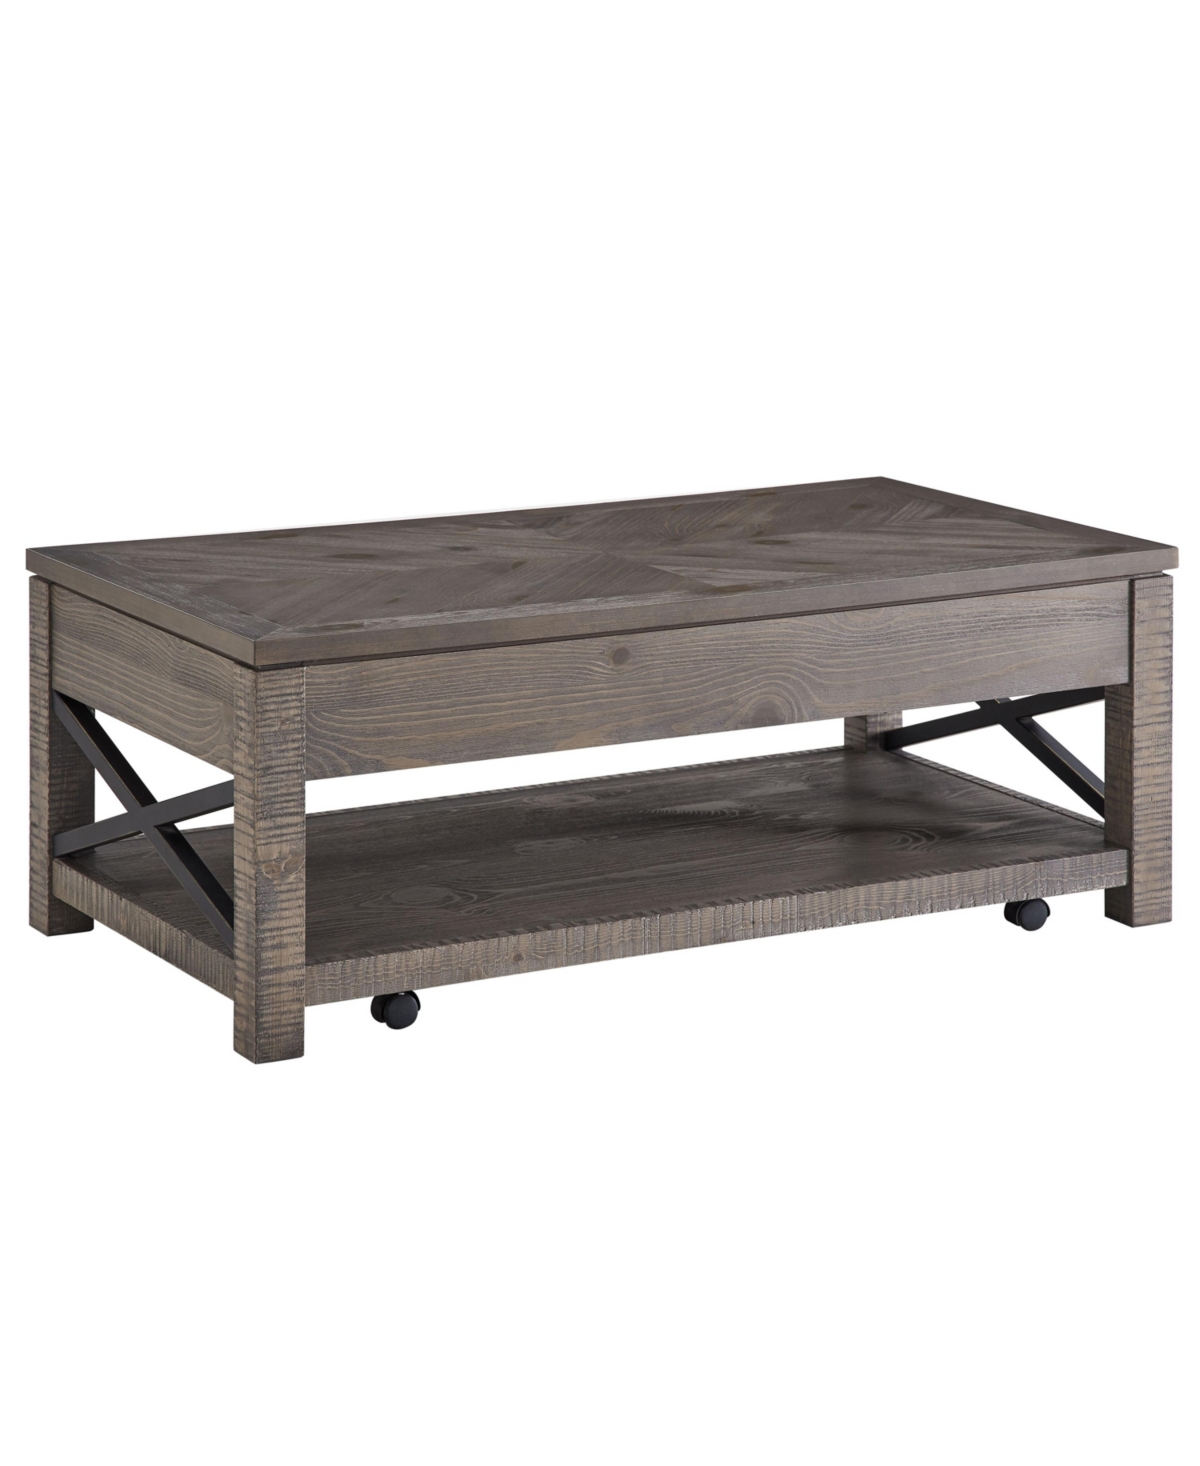 Steve Silver Dexter 48" Wide Wooden Lift Top Cocktail Table In Driftwood With Ruff-hewn Distressing